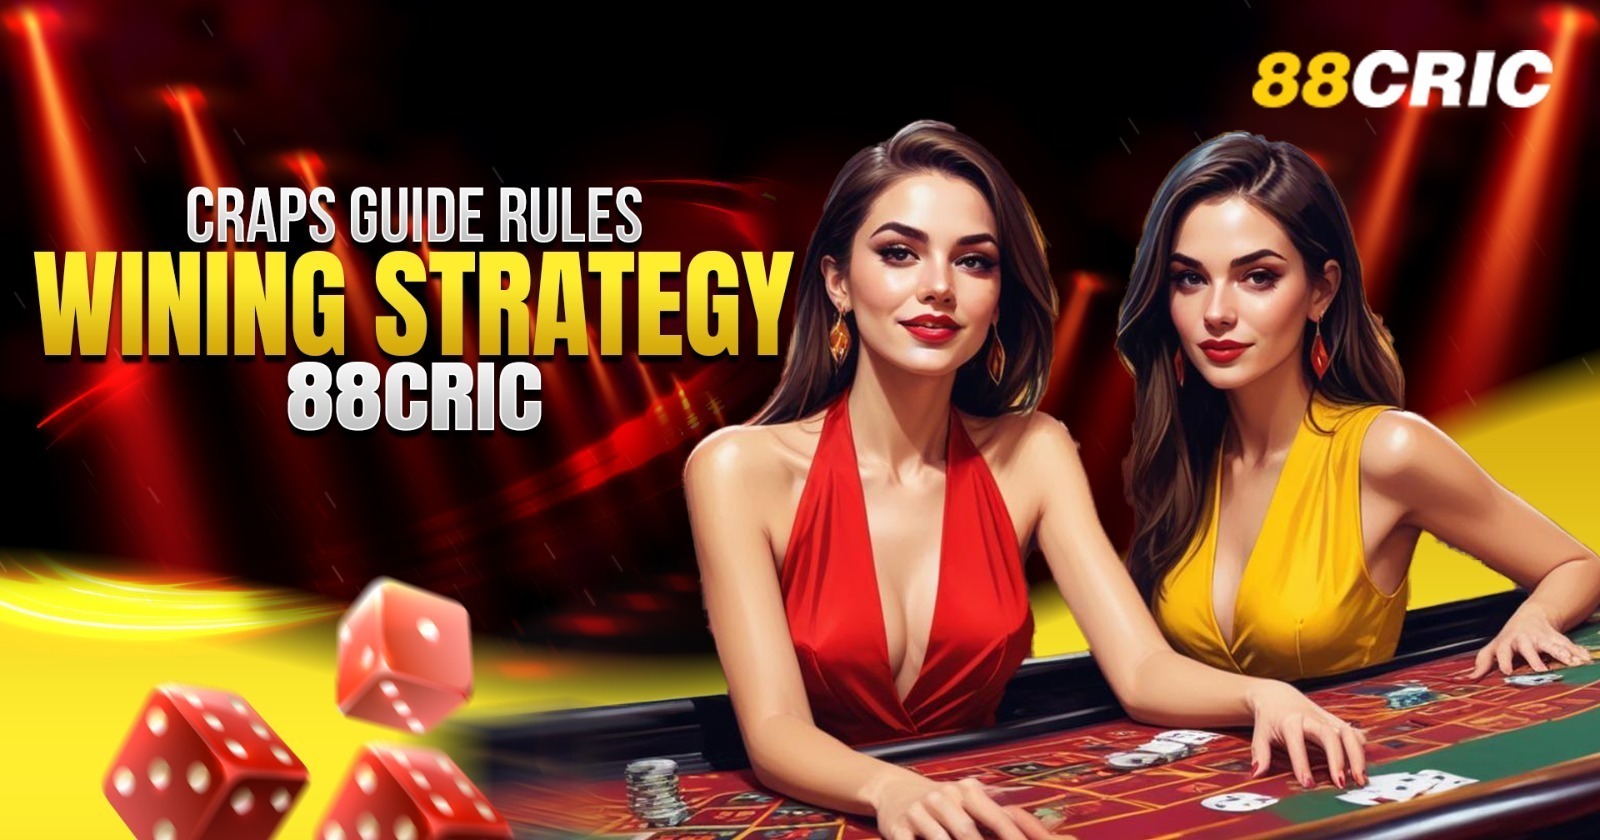 Craps Guide Rules Winning Strategy 88cric – Telegraph